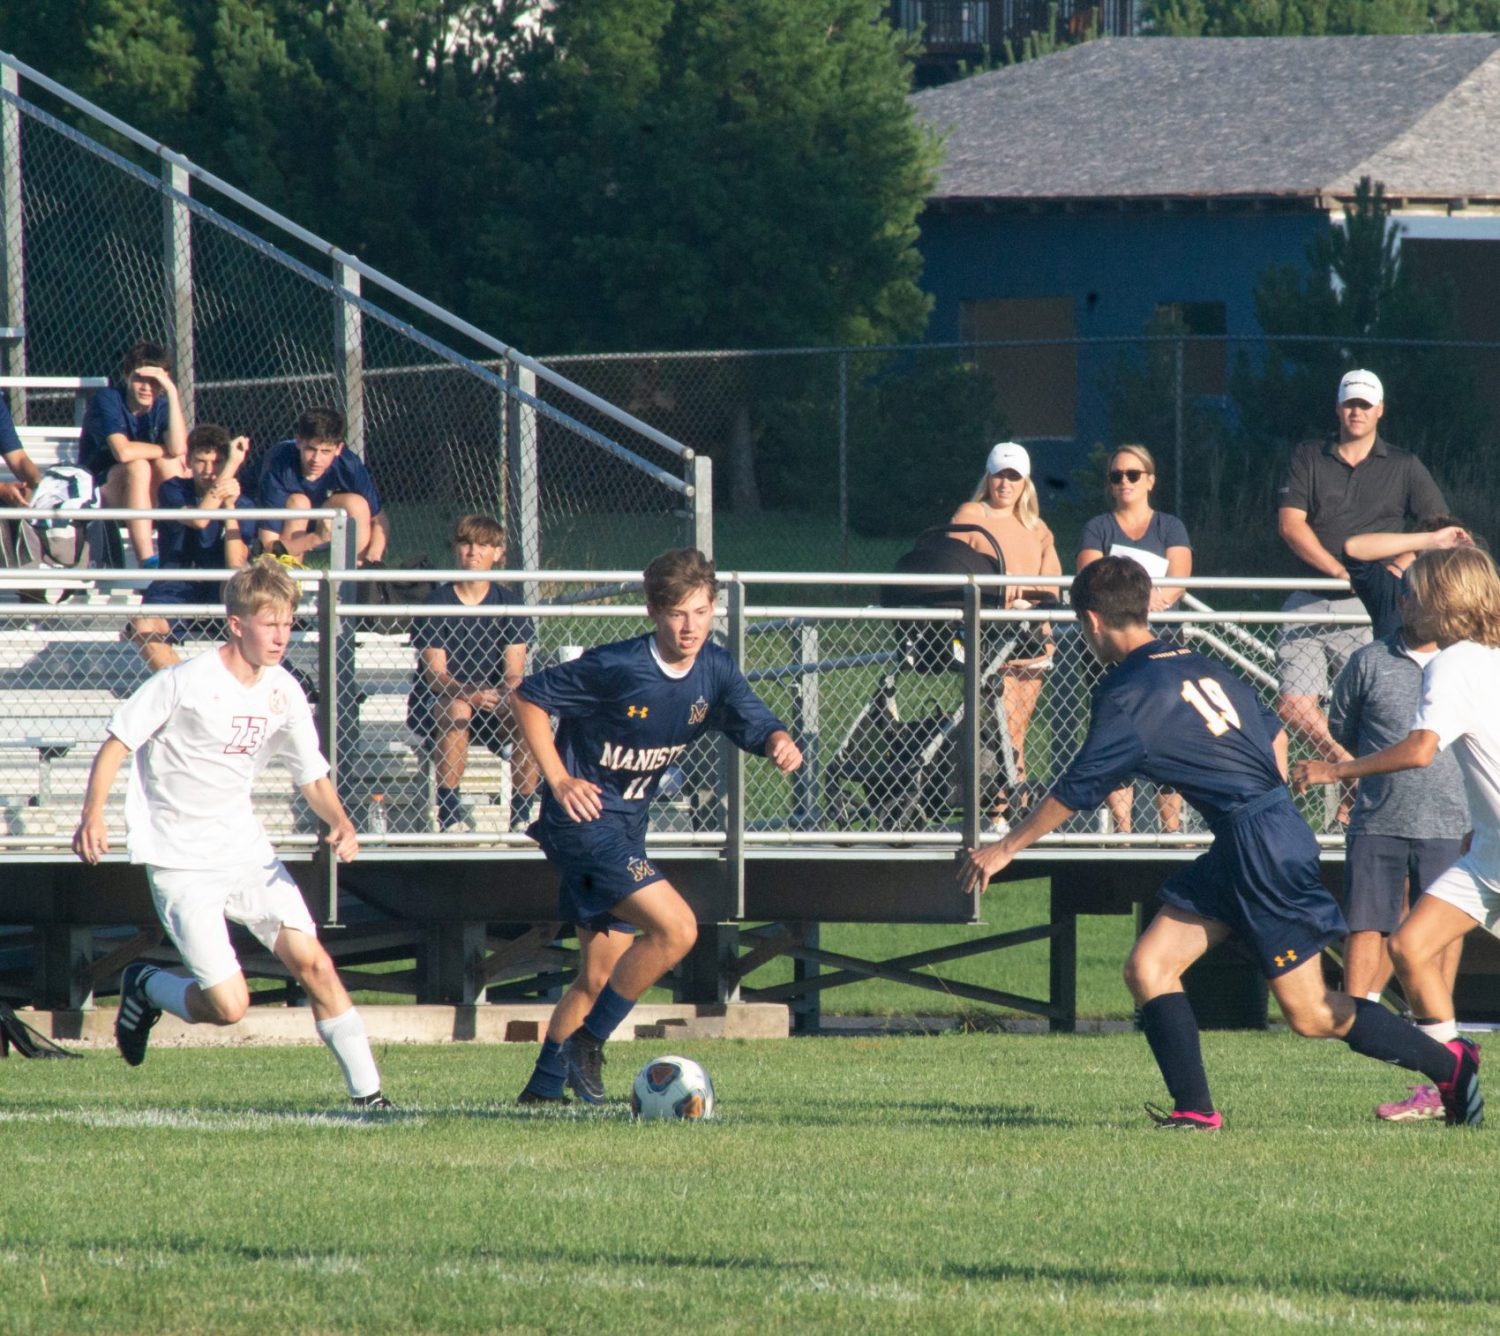 Manistee shuts out Big Rapids 4-0 in Friday soccer action